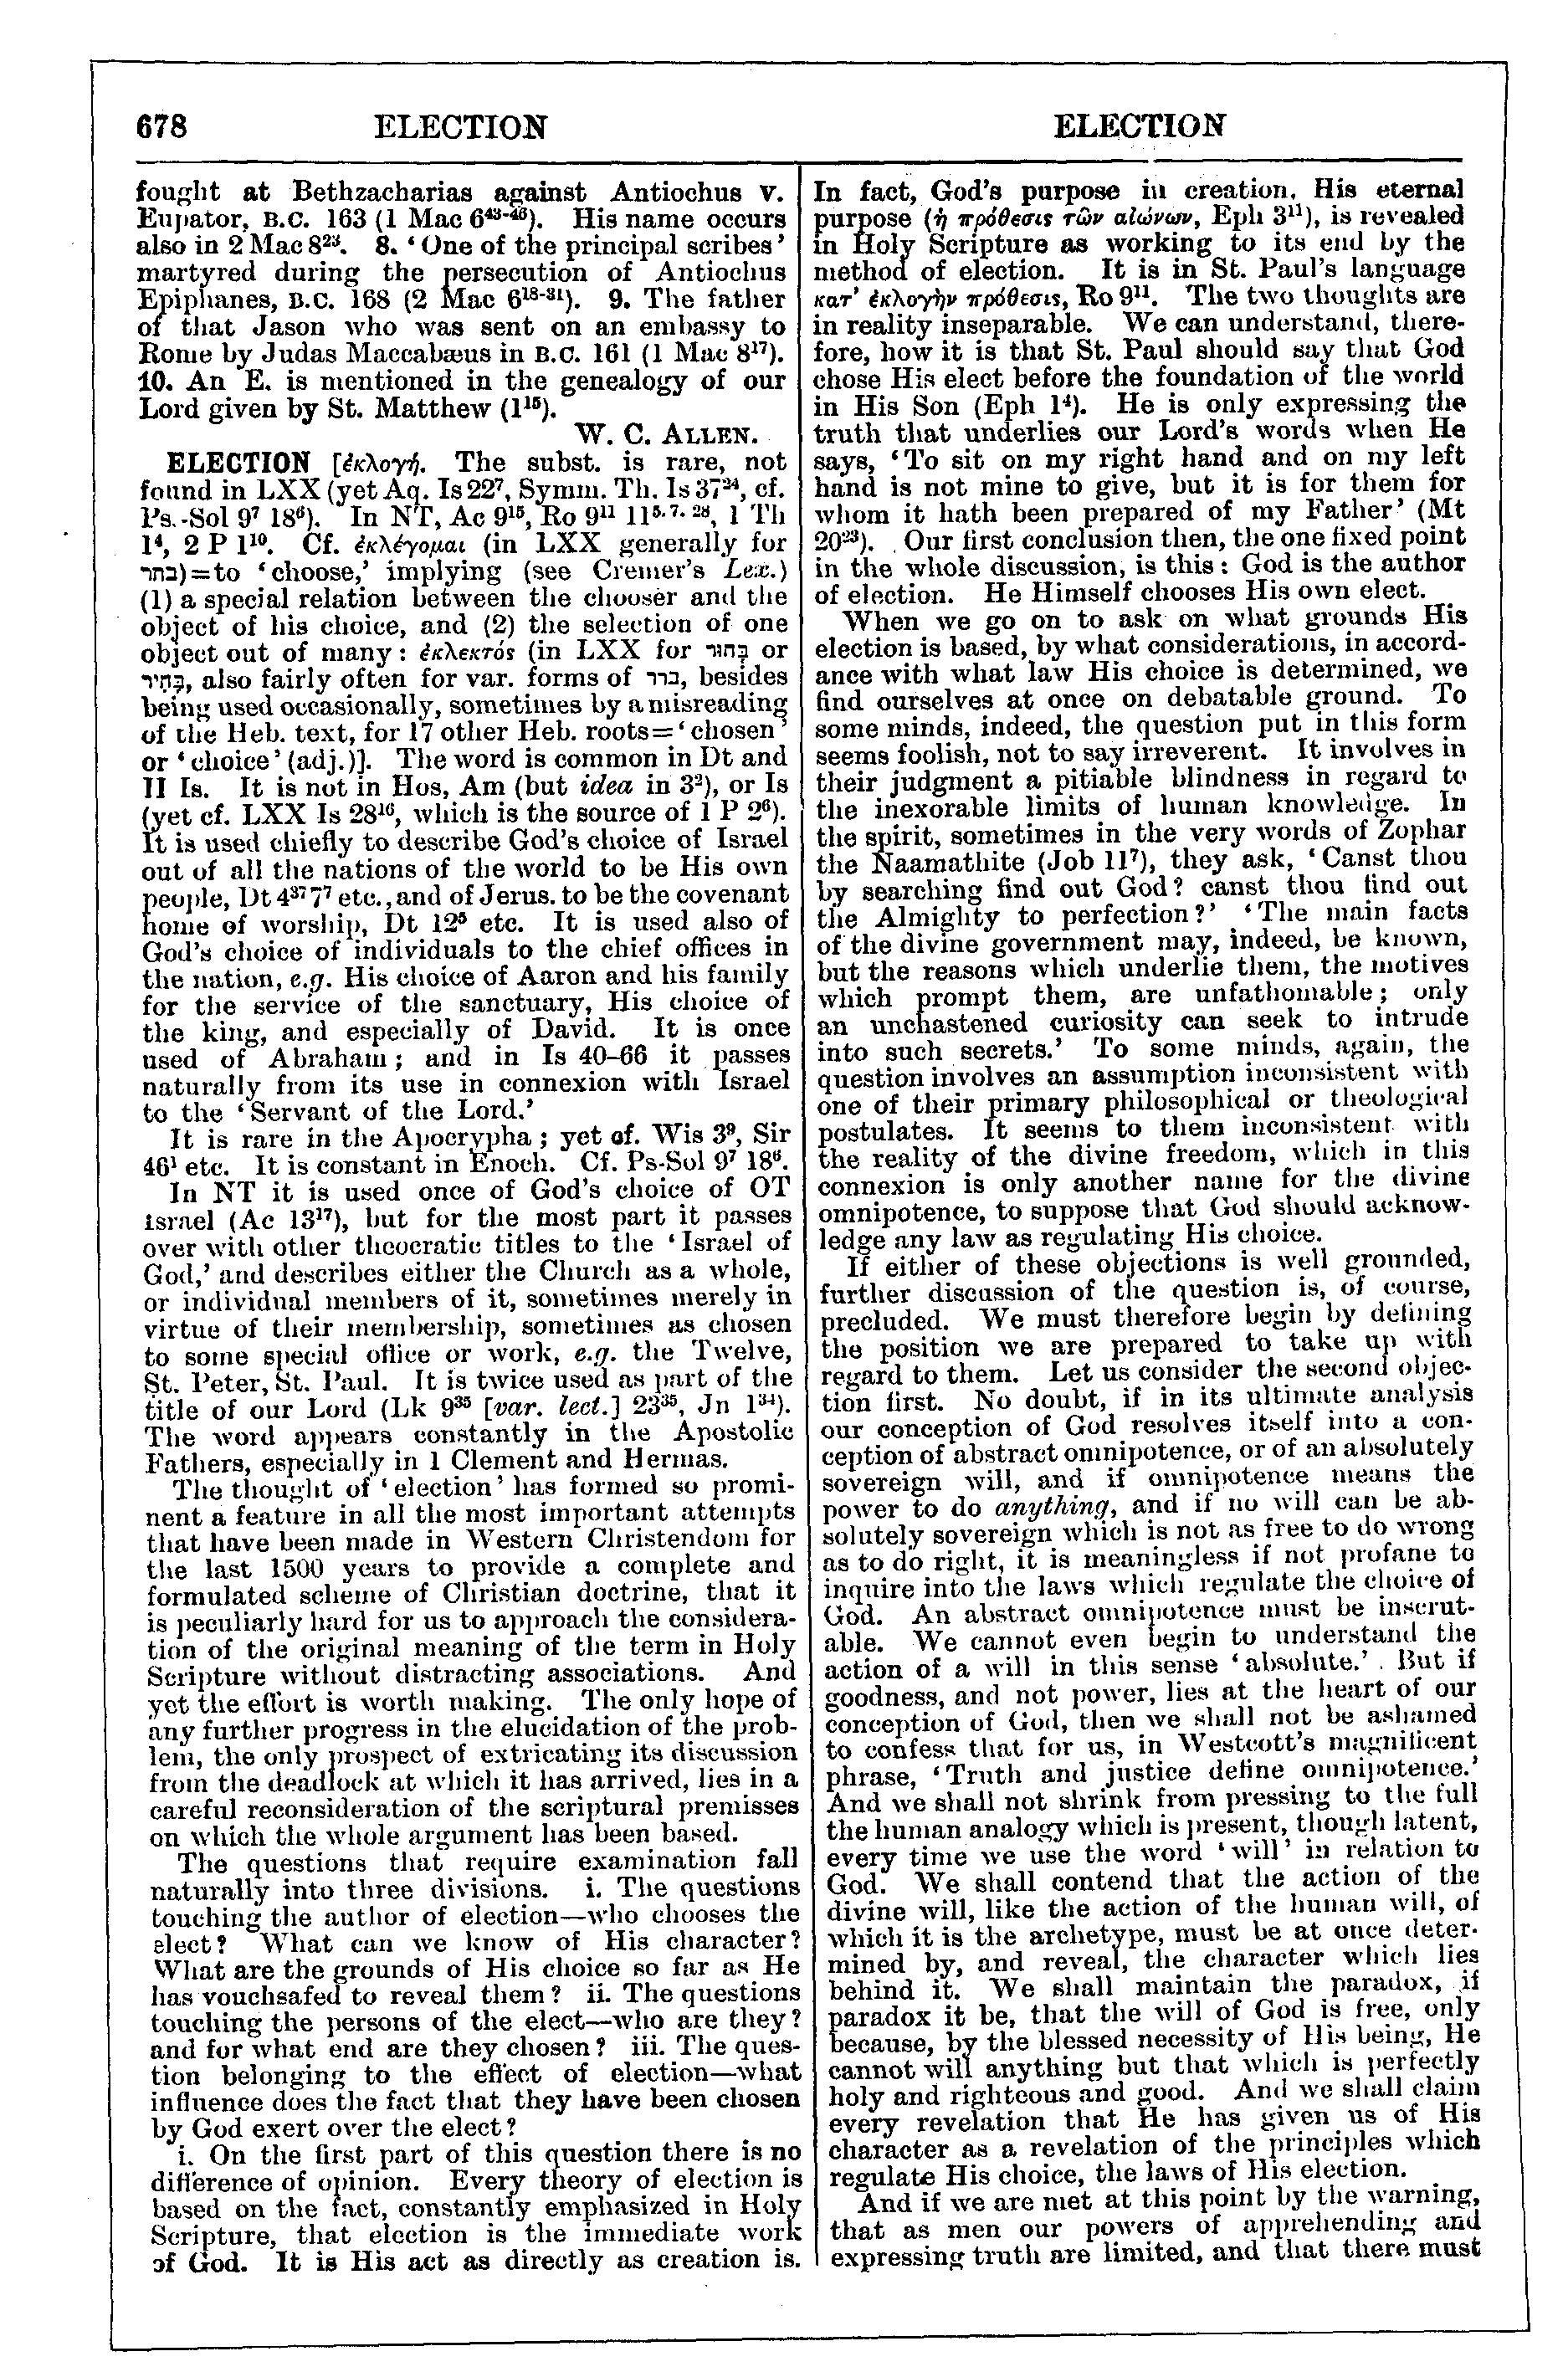 Image of page 678